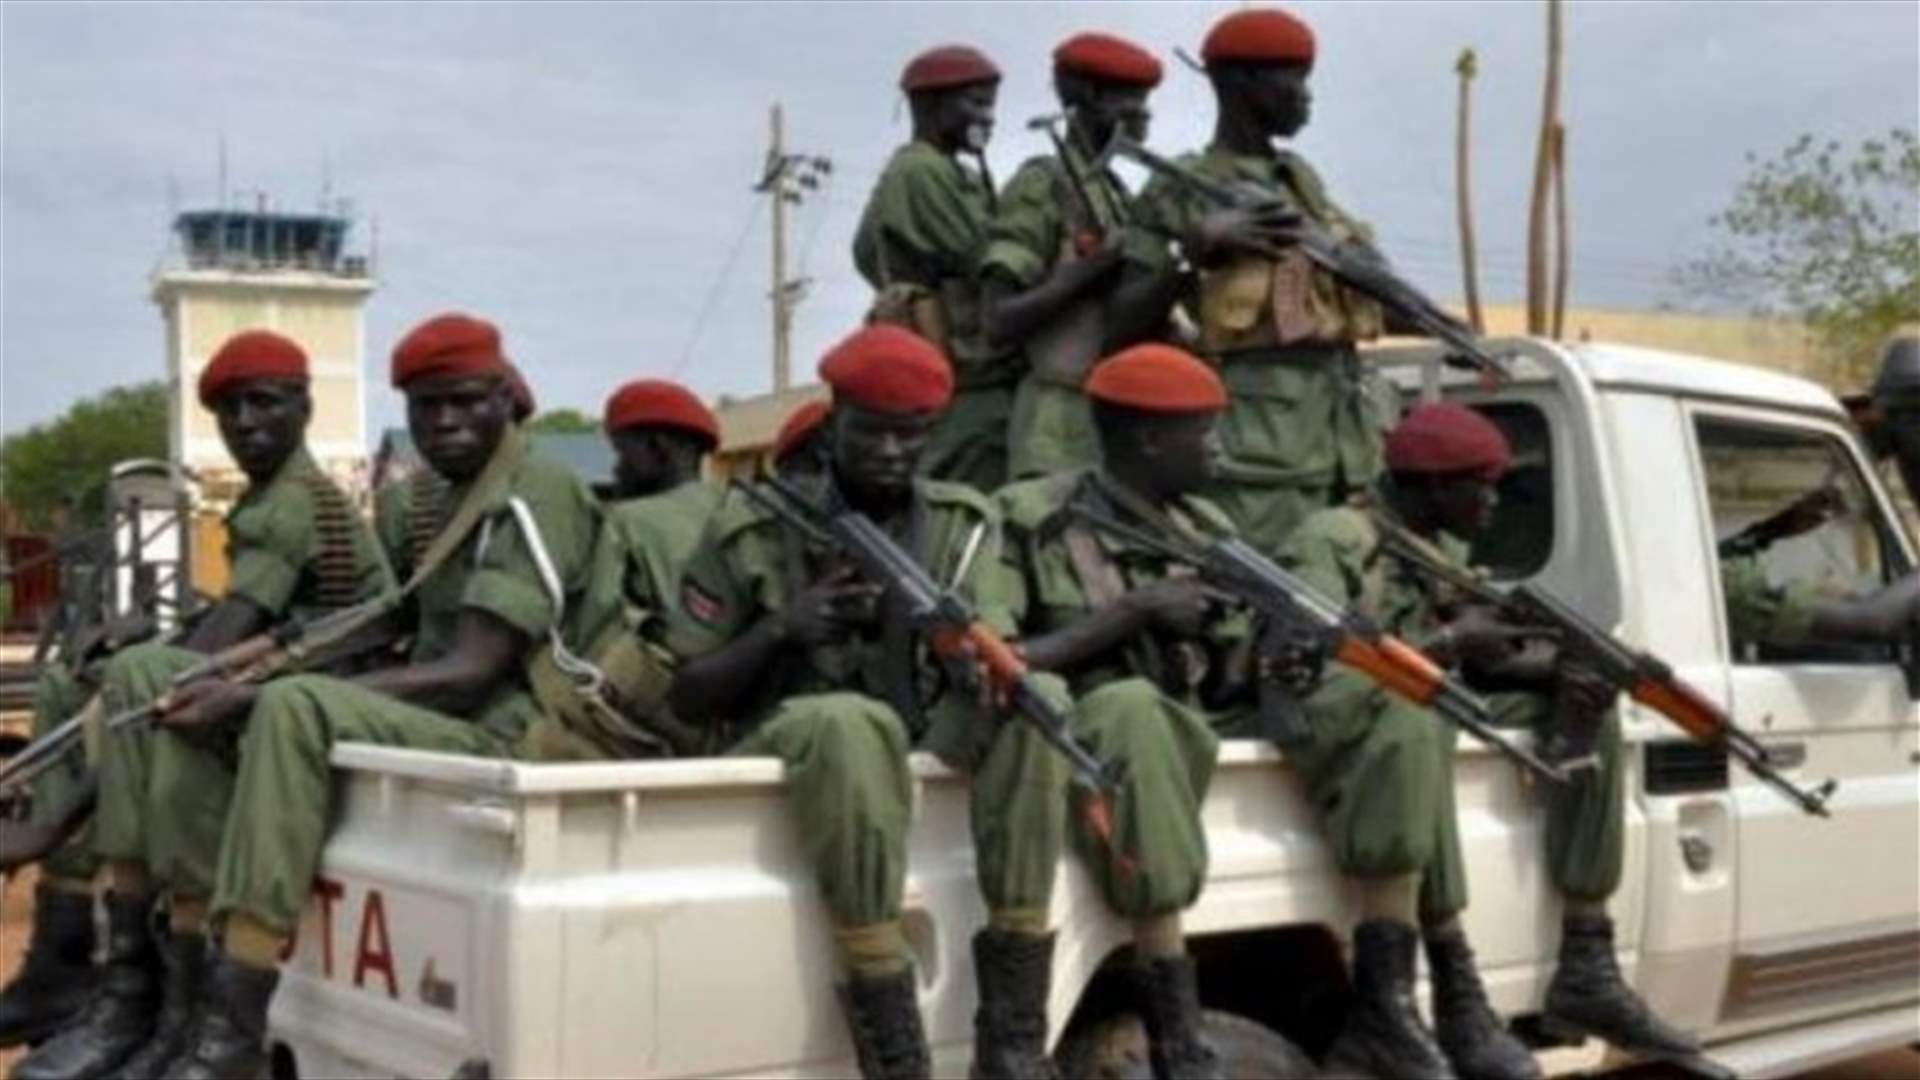 South Sudan soldiers accused of rape, murder of aid workers appear in court